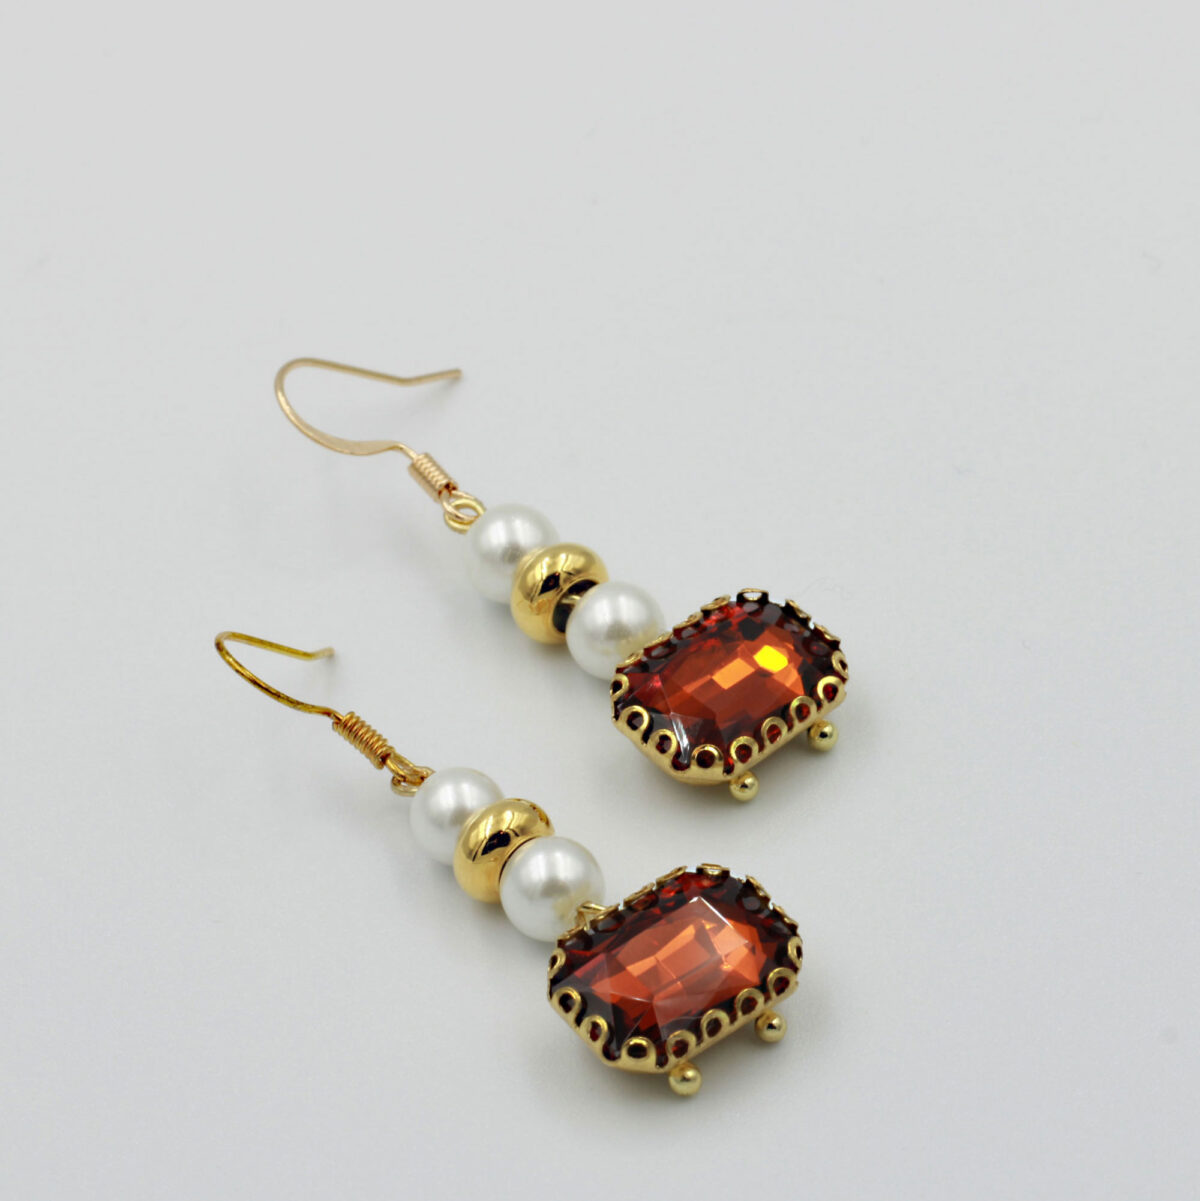 Earrings With Crystal In Bronze Shade With Pearl And Hematite